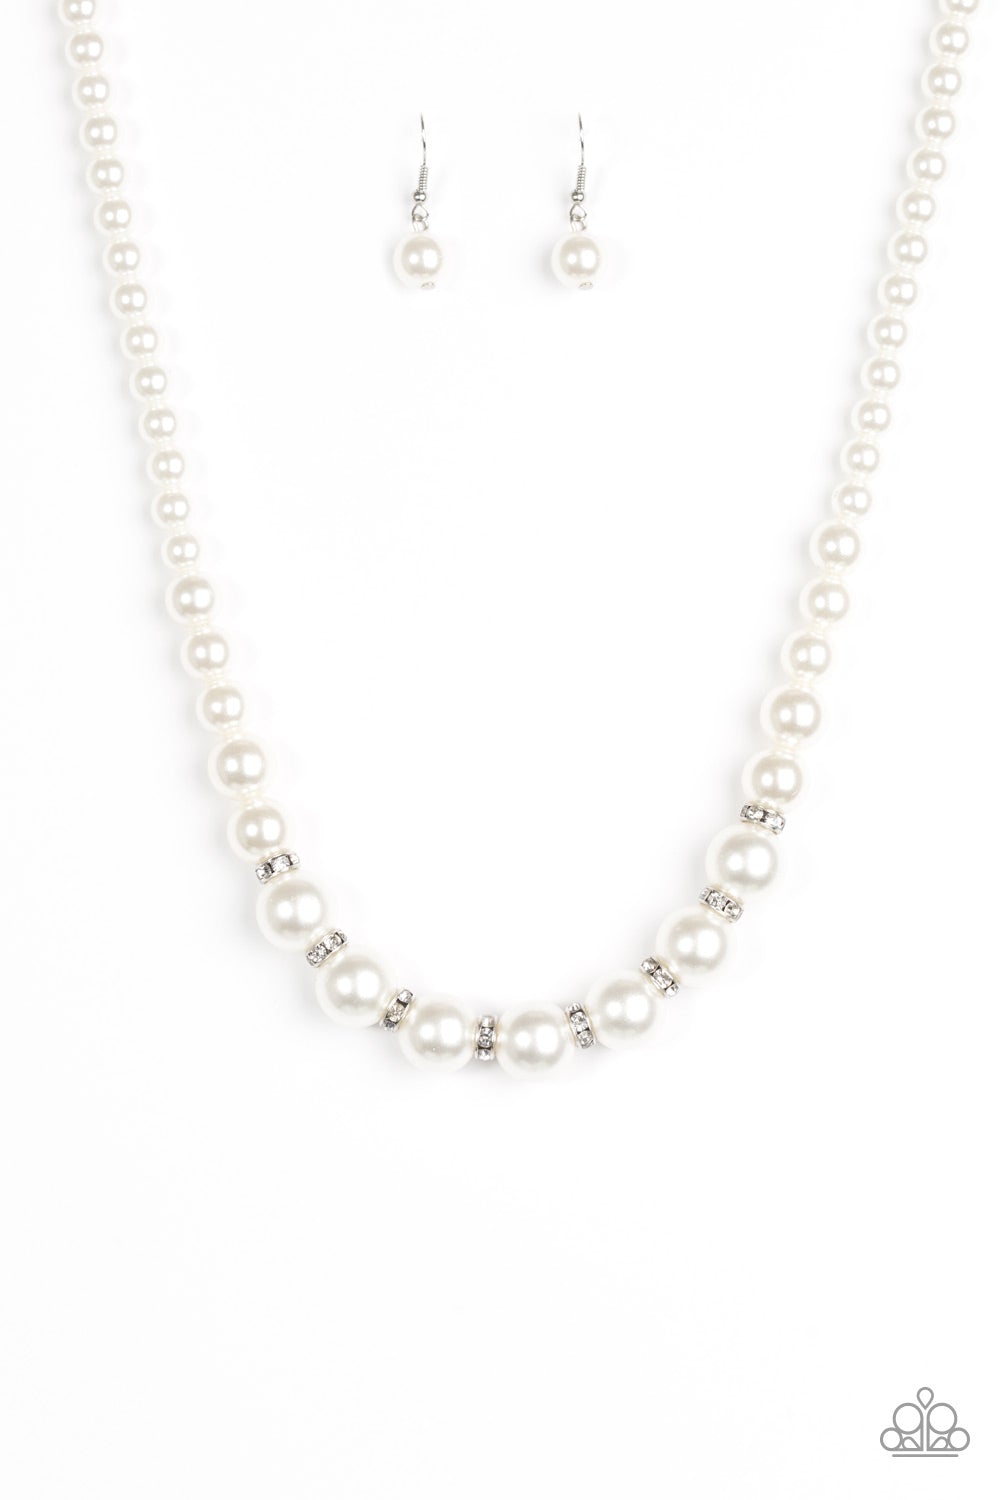 Showtime Shimmer White Necklace